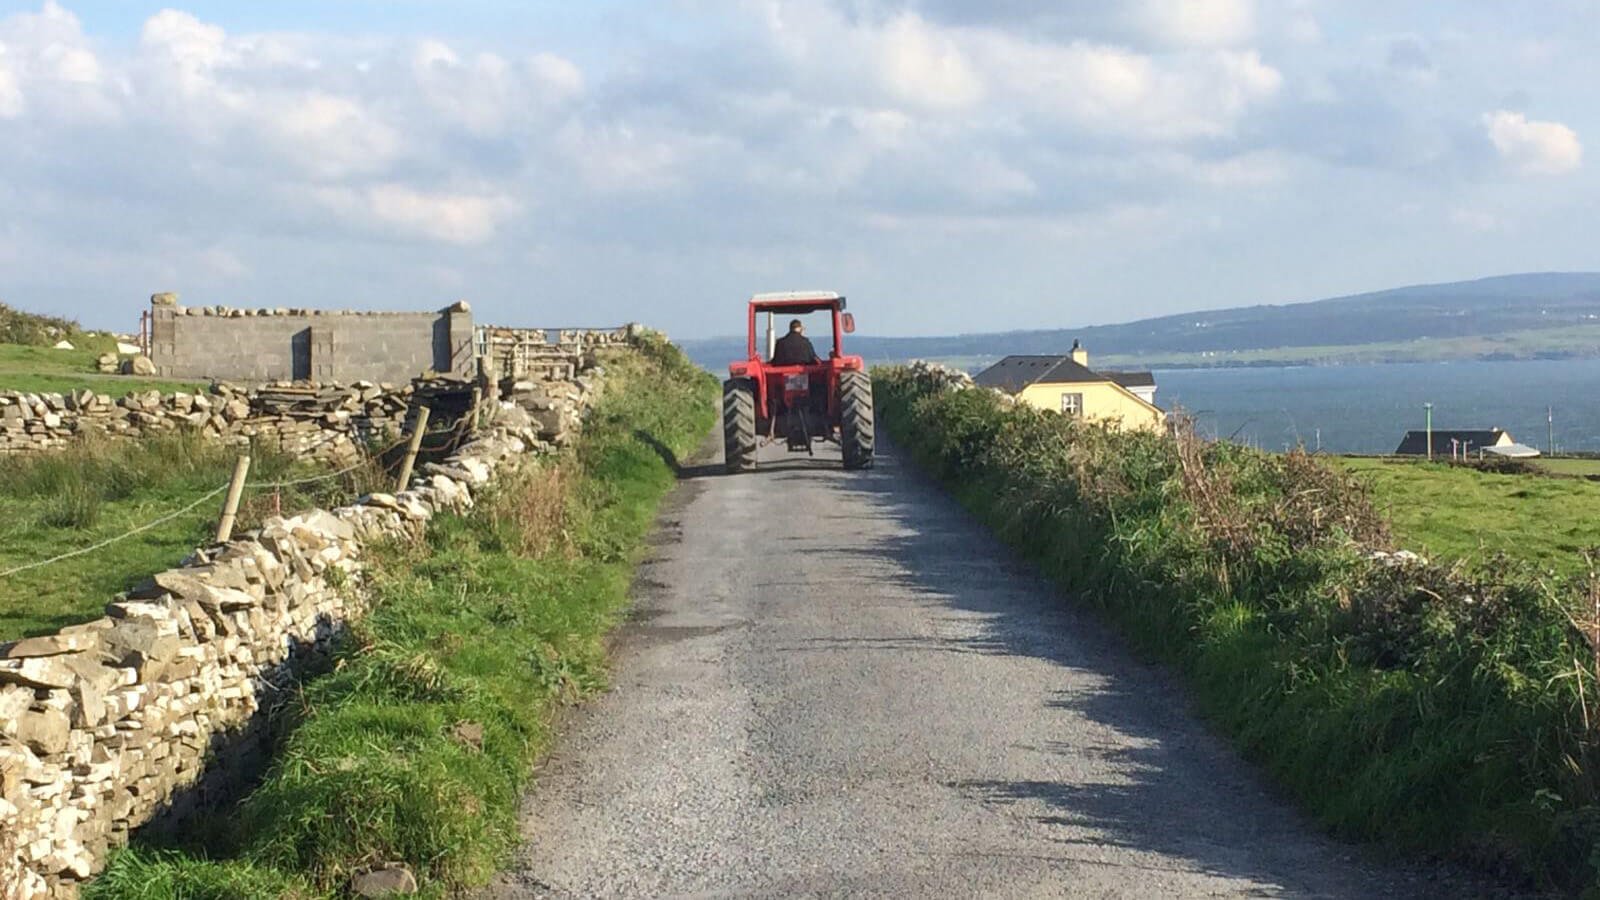 An empty, rural Irish laneway with a dry stone wall and red tractor driving into the distance